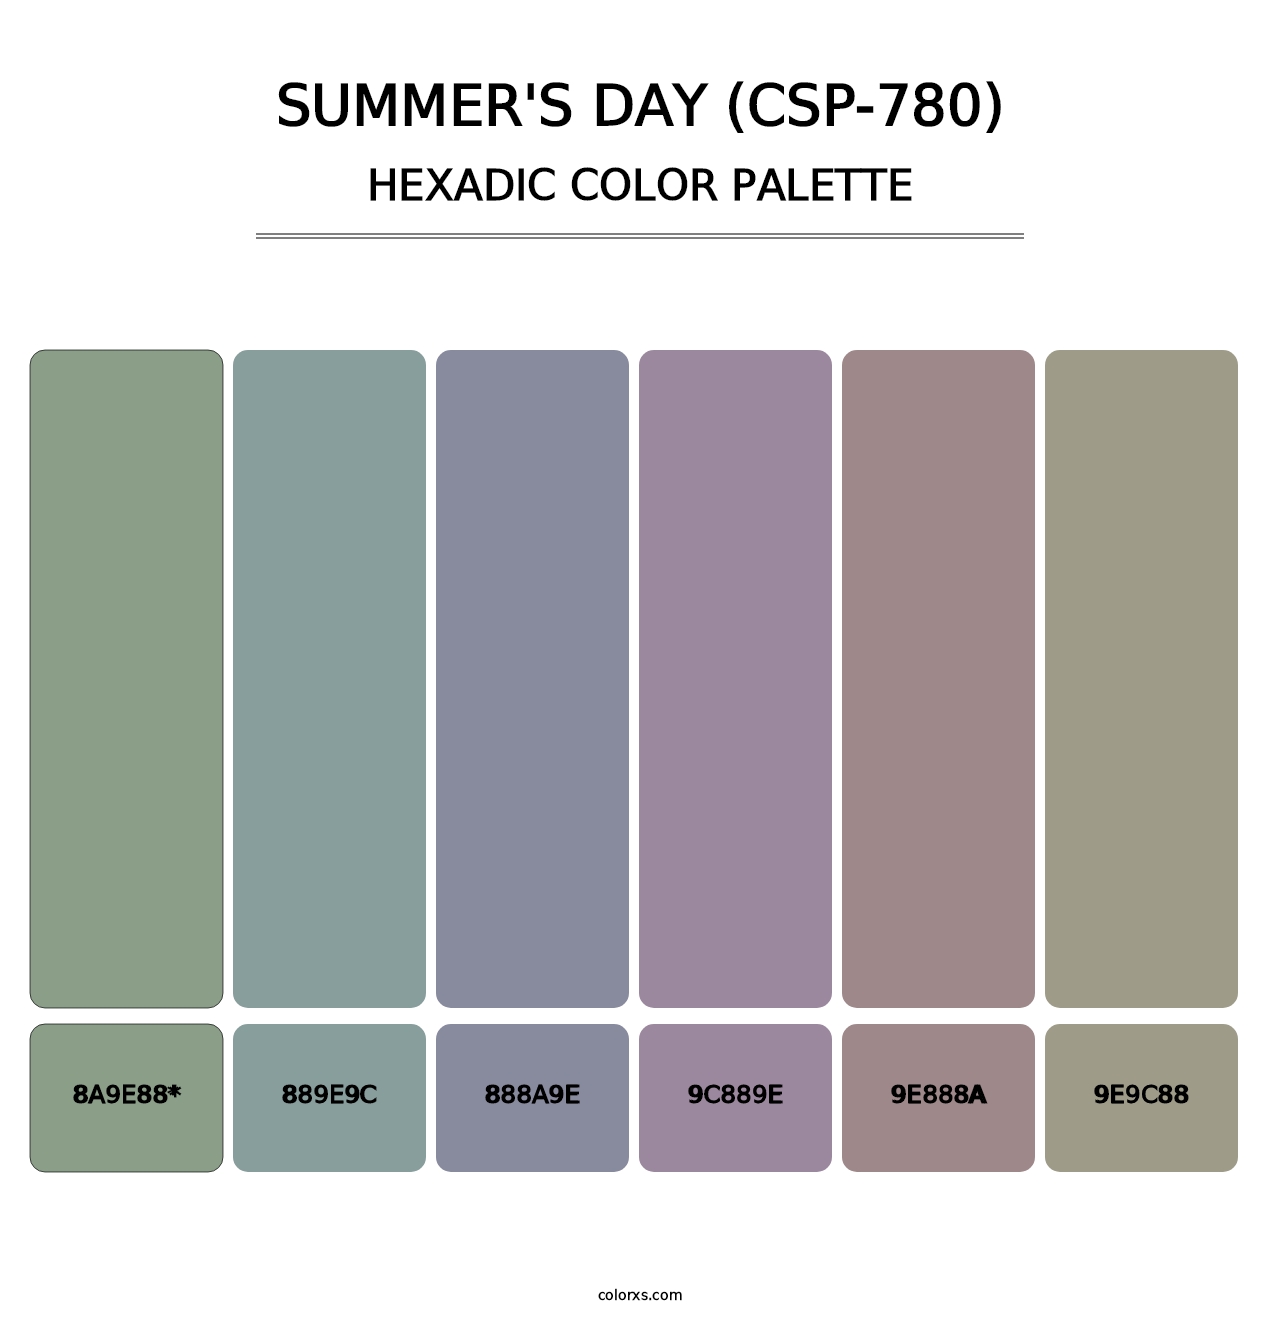 Summer's Day (CSP-780) - Hexadic Color Palette